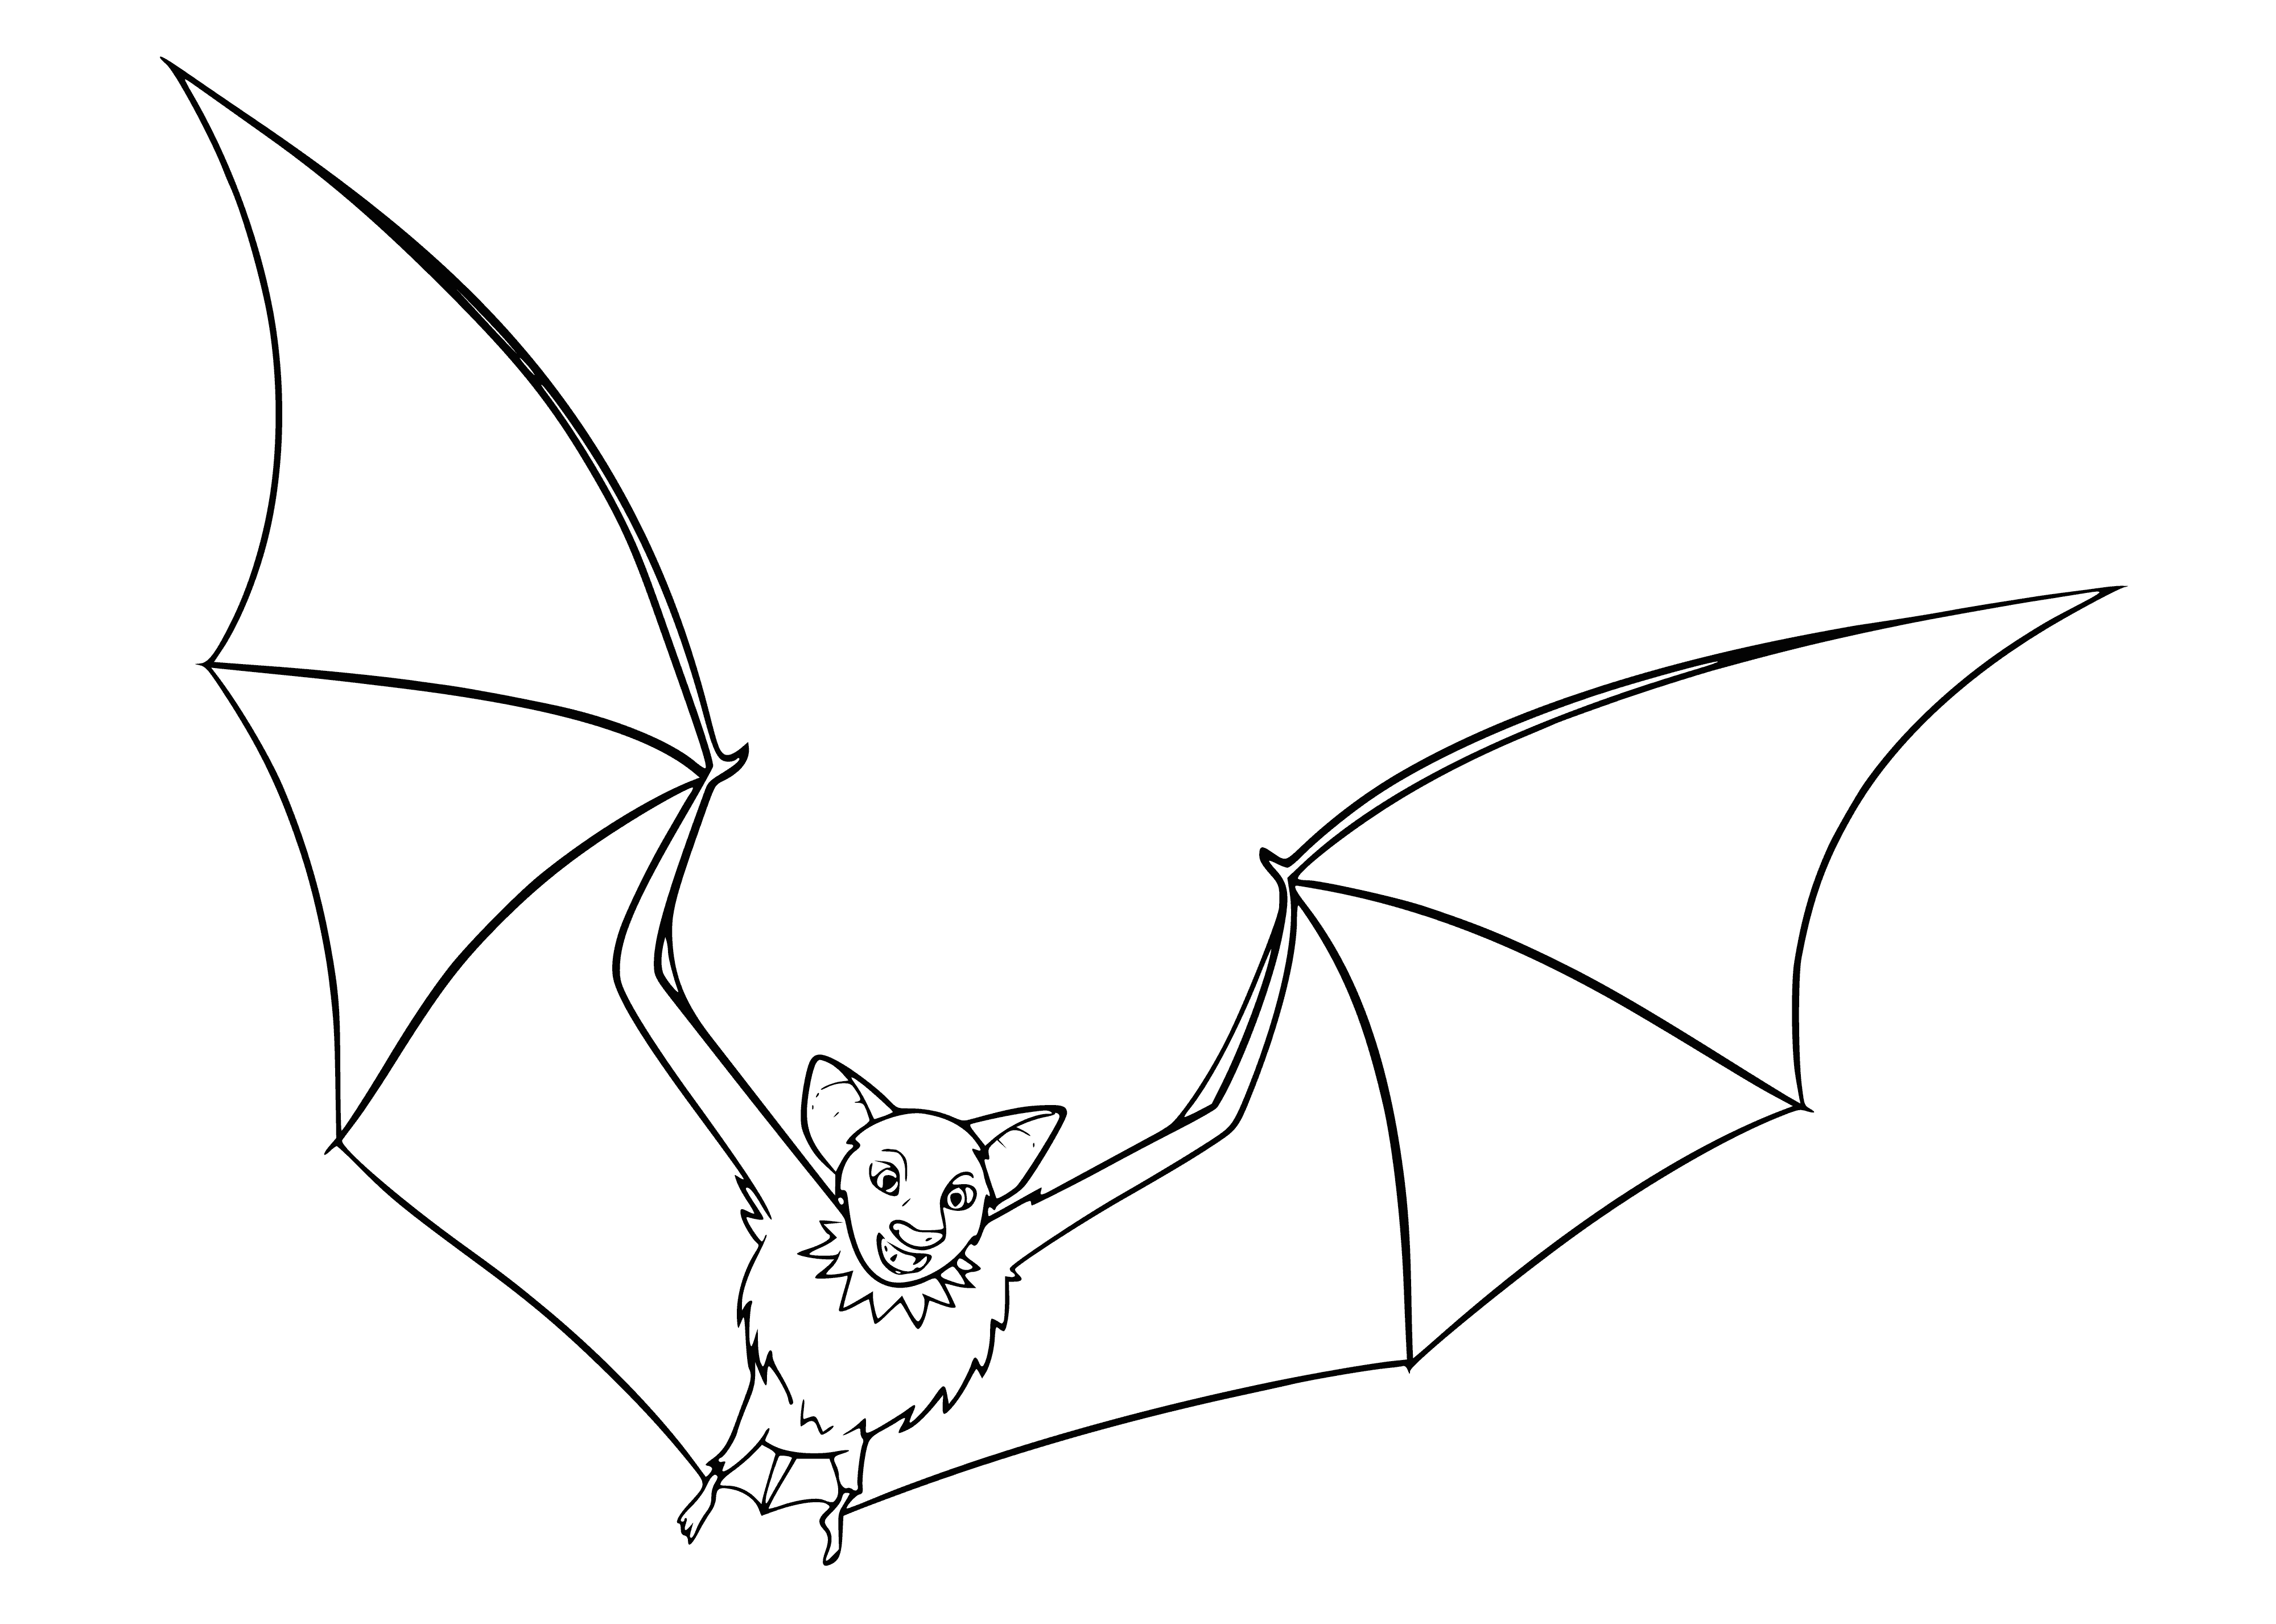 Dracula in the form of a bat coloring page